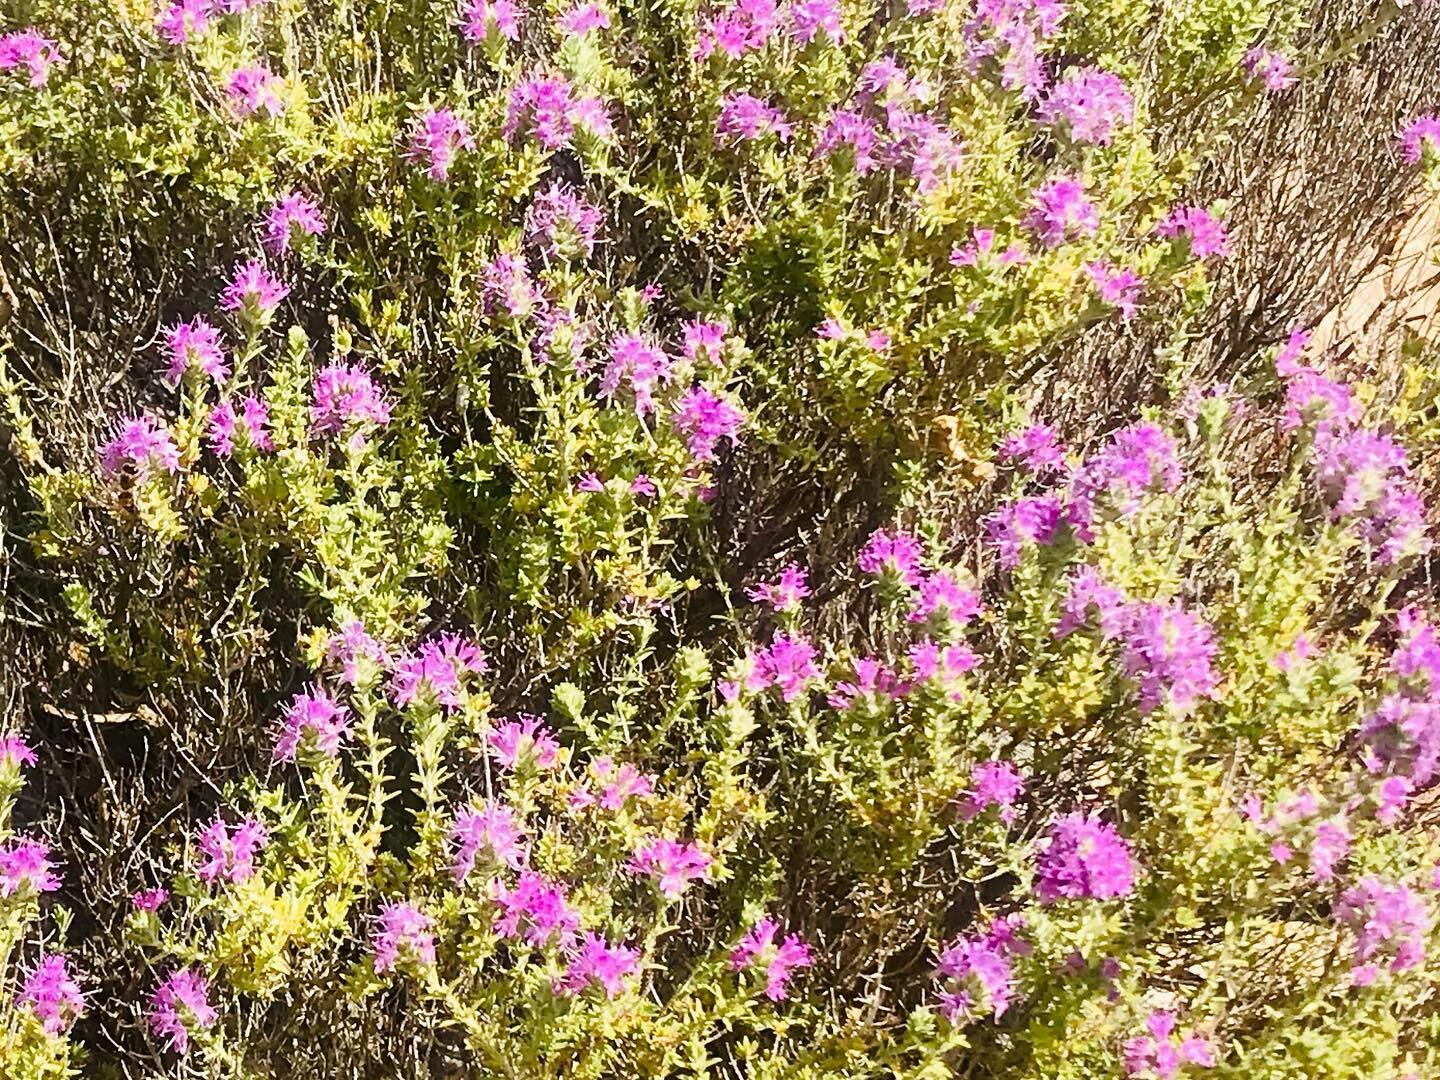 Where the wild things grow 🌱

Ahh this beautiful wild mountain thyme is so glorious at the moment, with its pink flowers all in bloom. It grows everywhere here in Greece and it&rsquo;s scent catches you as you walk or drive the mountain roads. It&rs